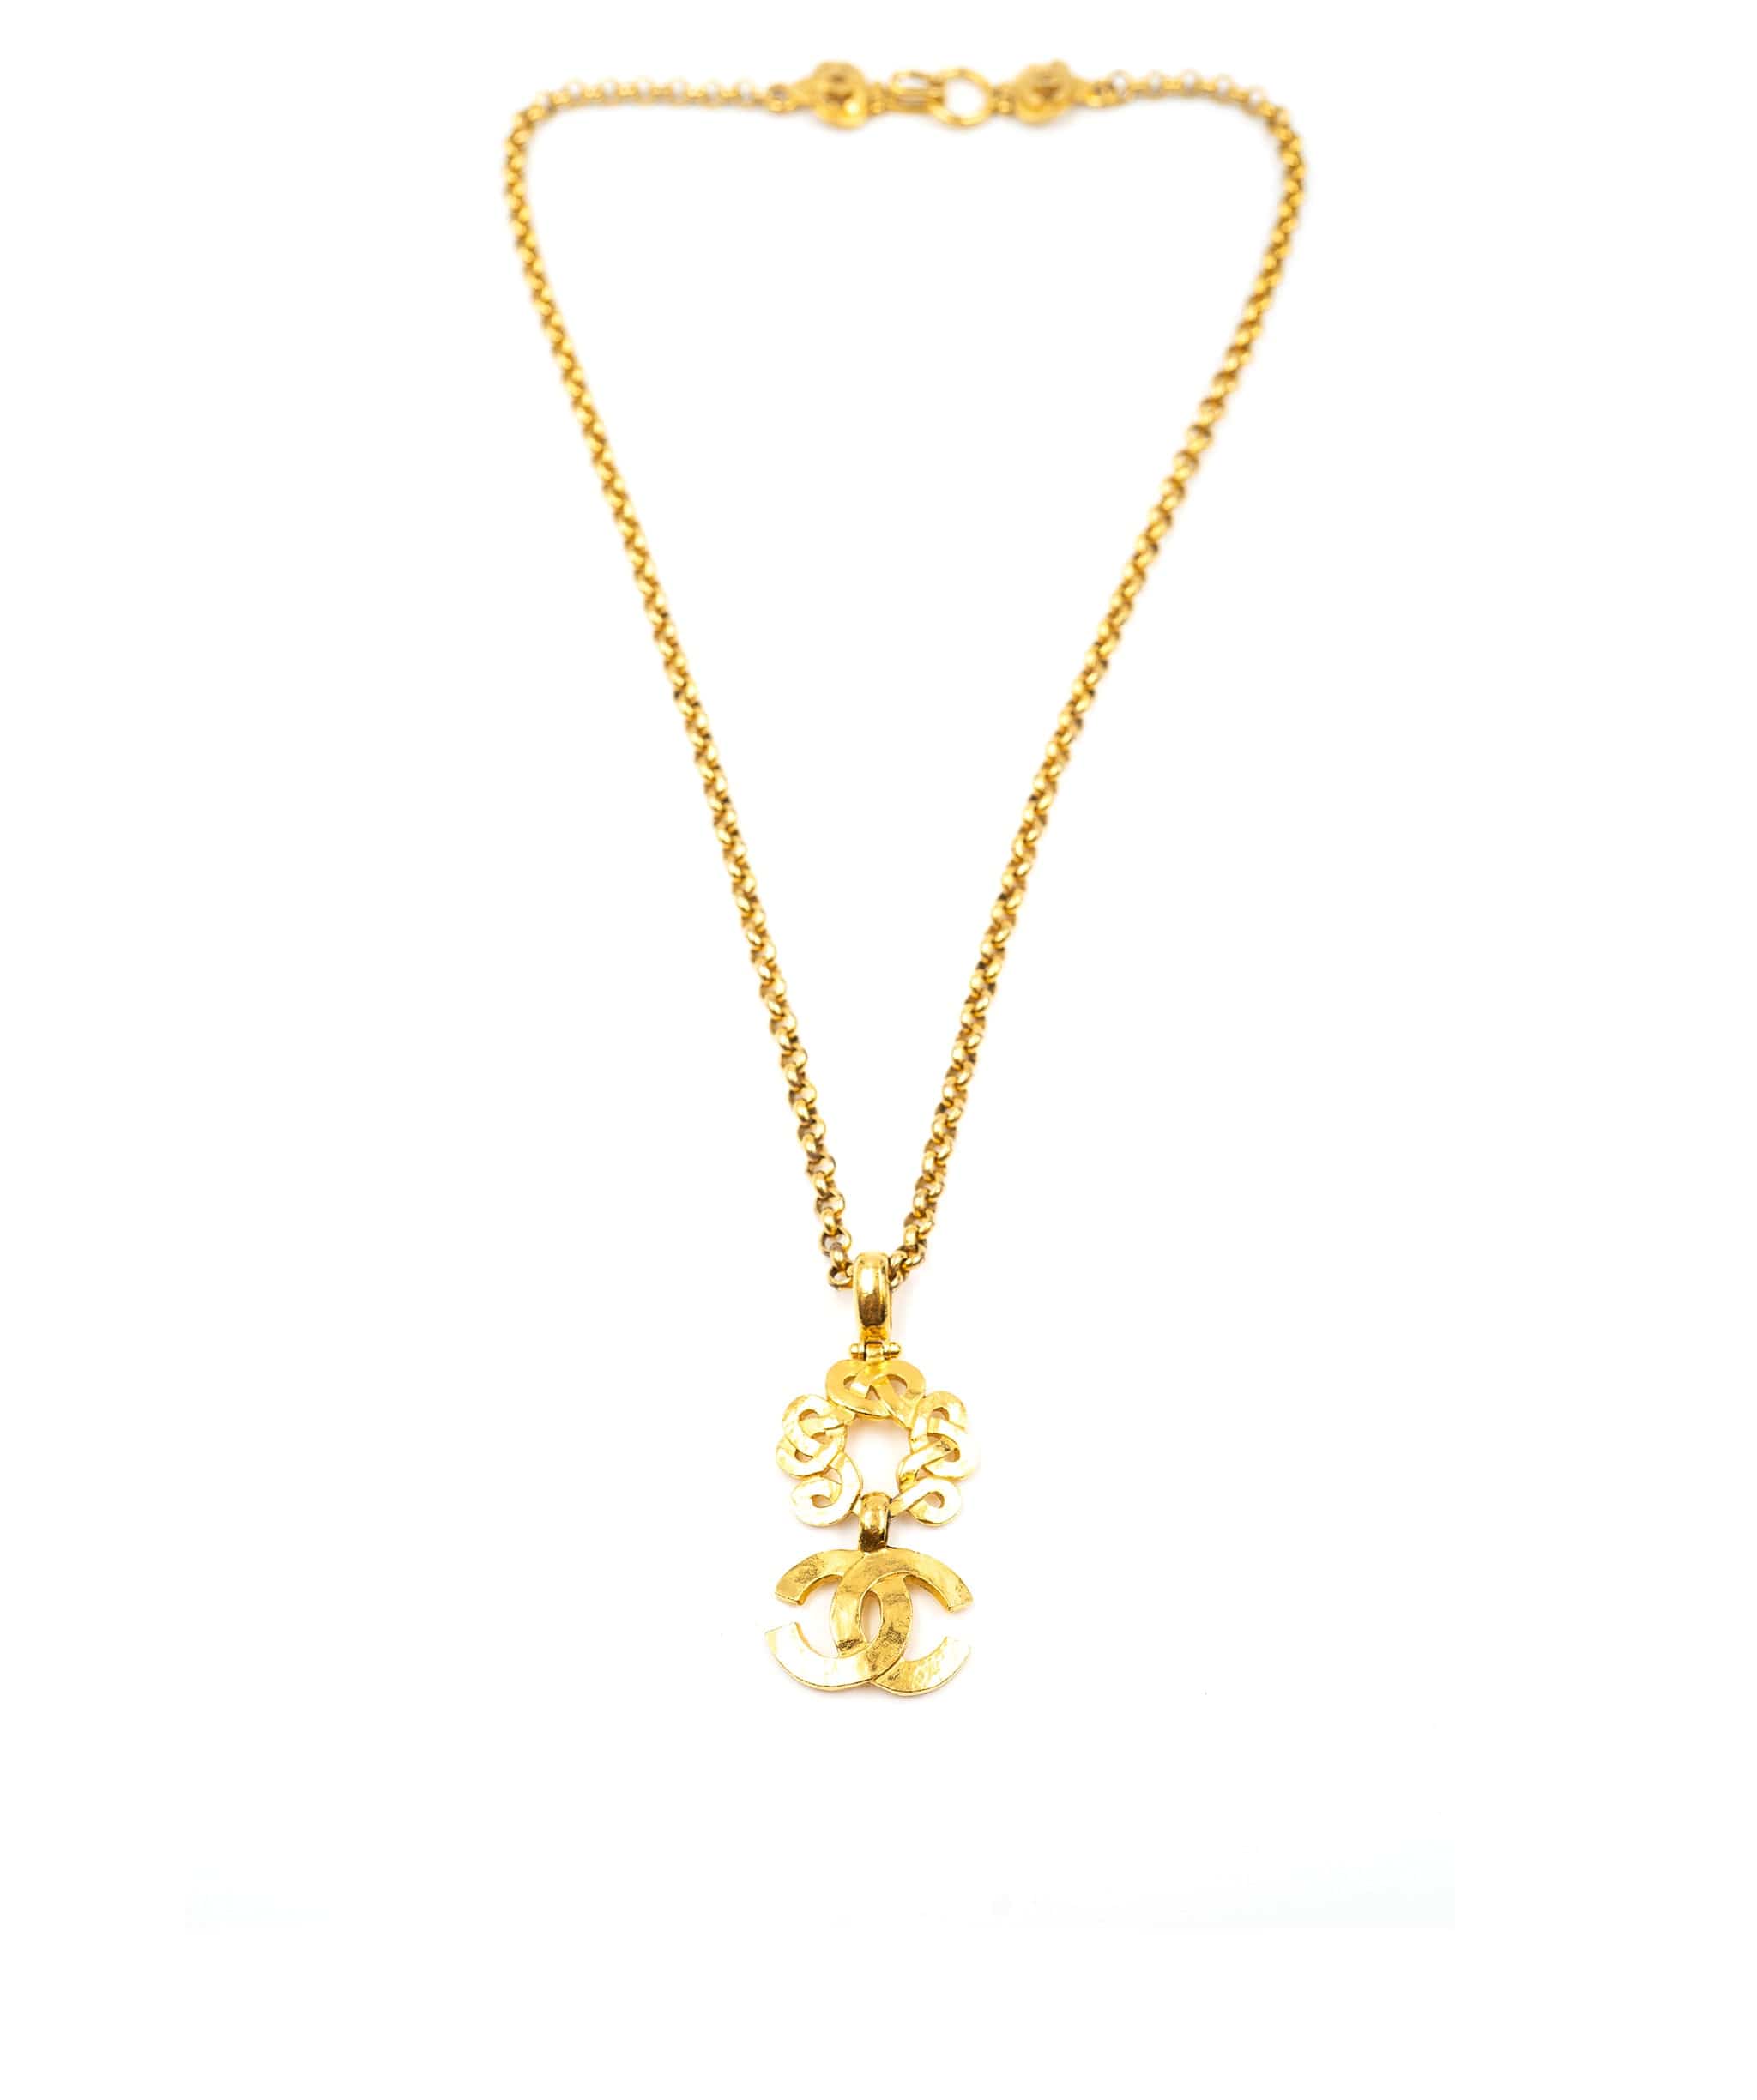 Chanel Chanel Logo 90's Necklace - AWC1404